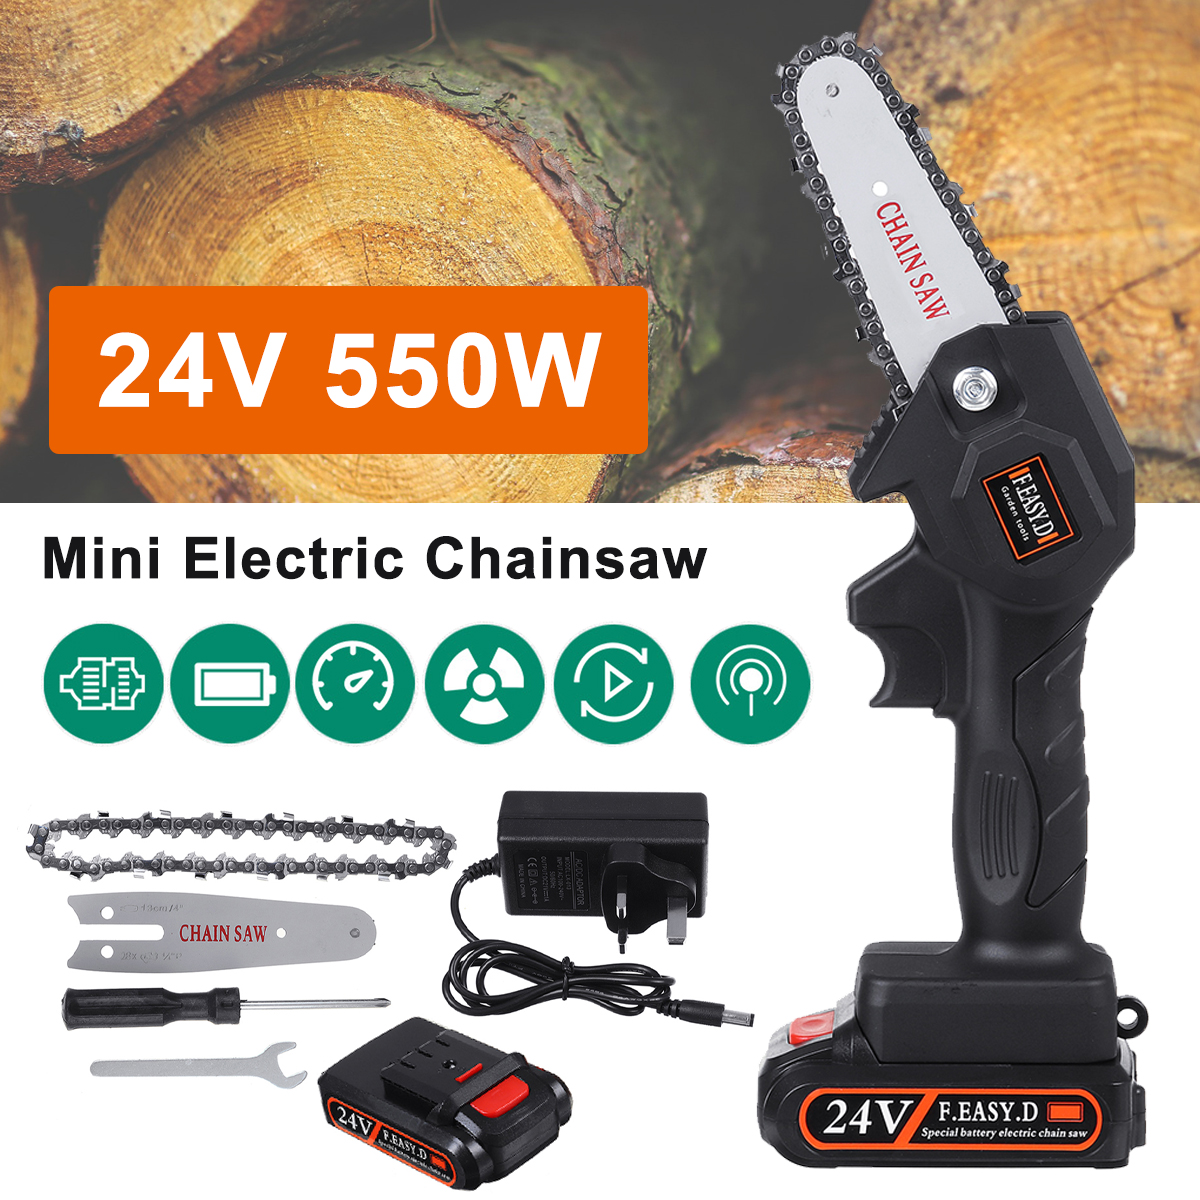 24V-550W-Rechargeable-Mini-Electric-Chainsaw-Handheld-Wood-Pruning-Saw-Kit-1776999-1